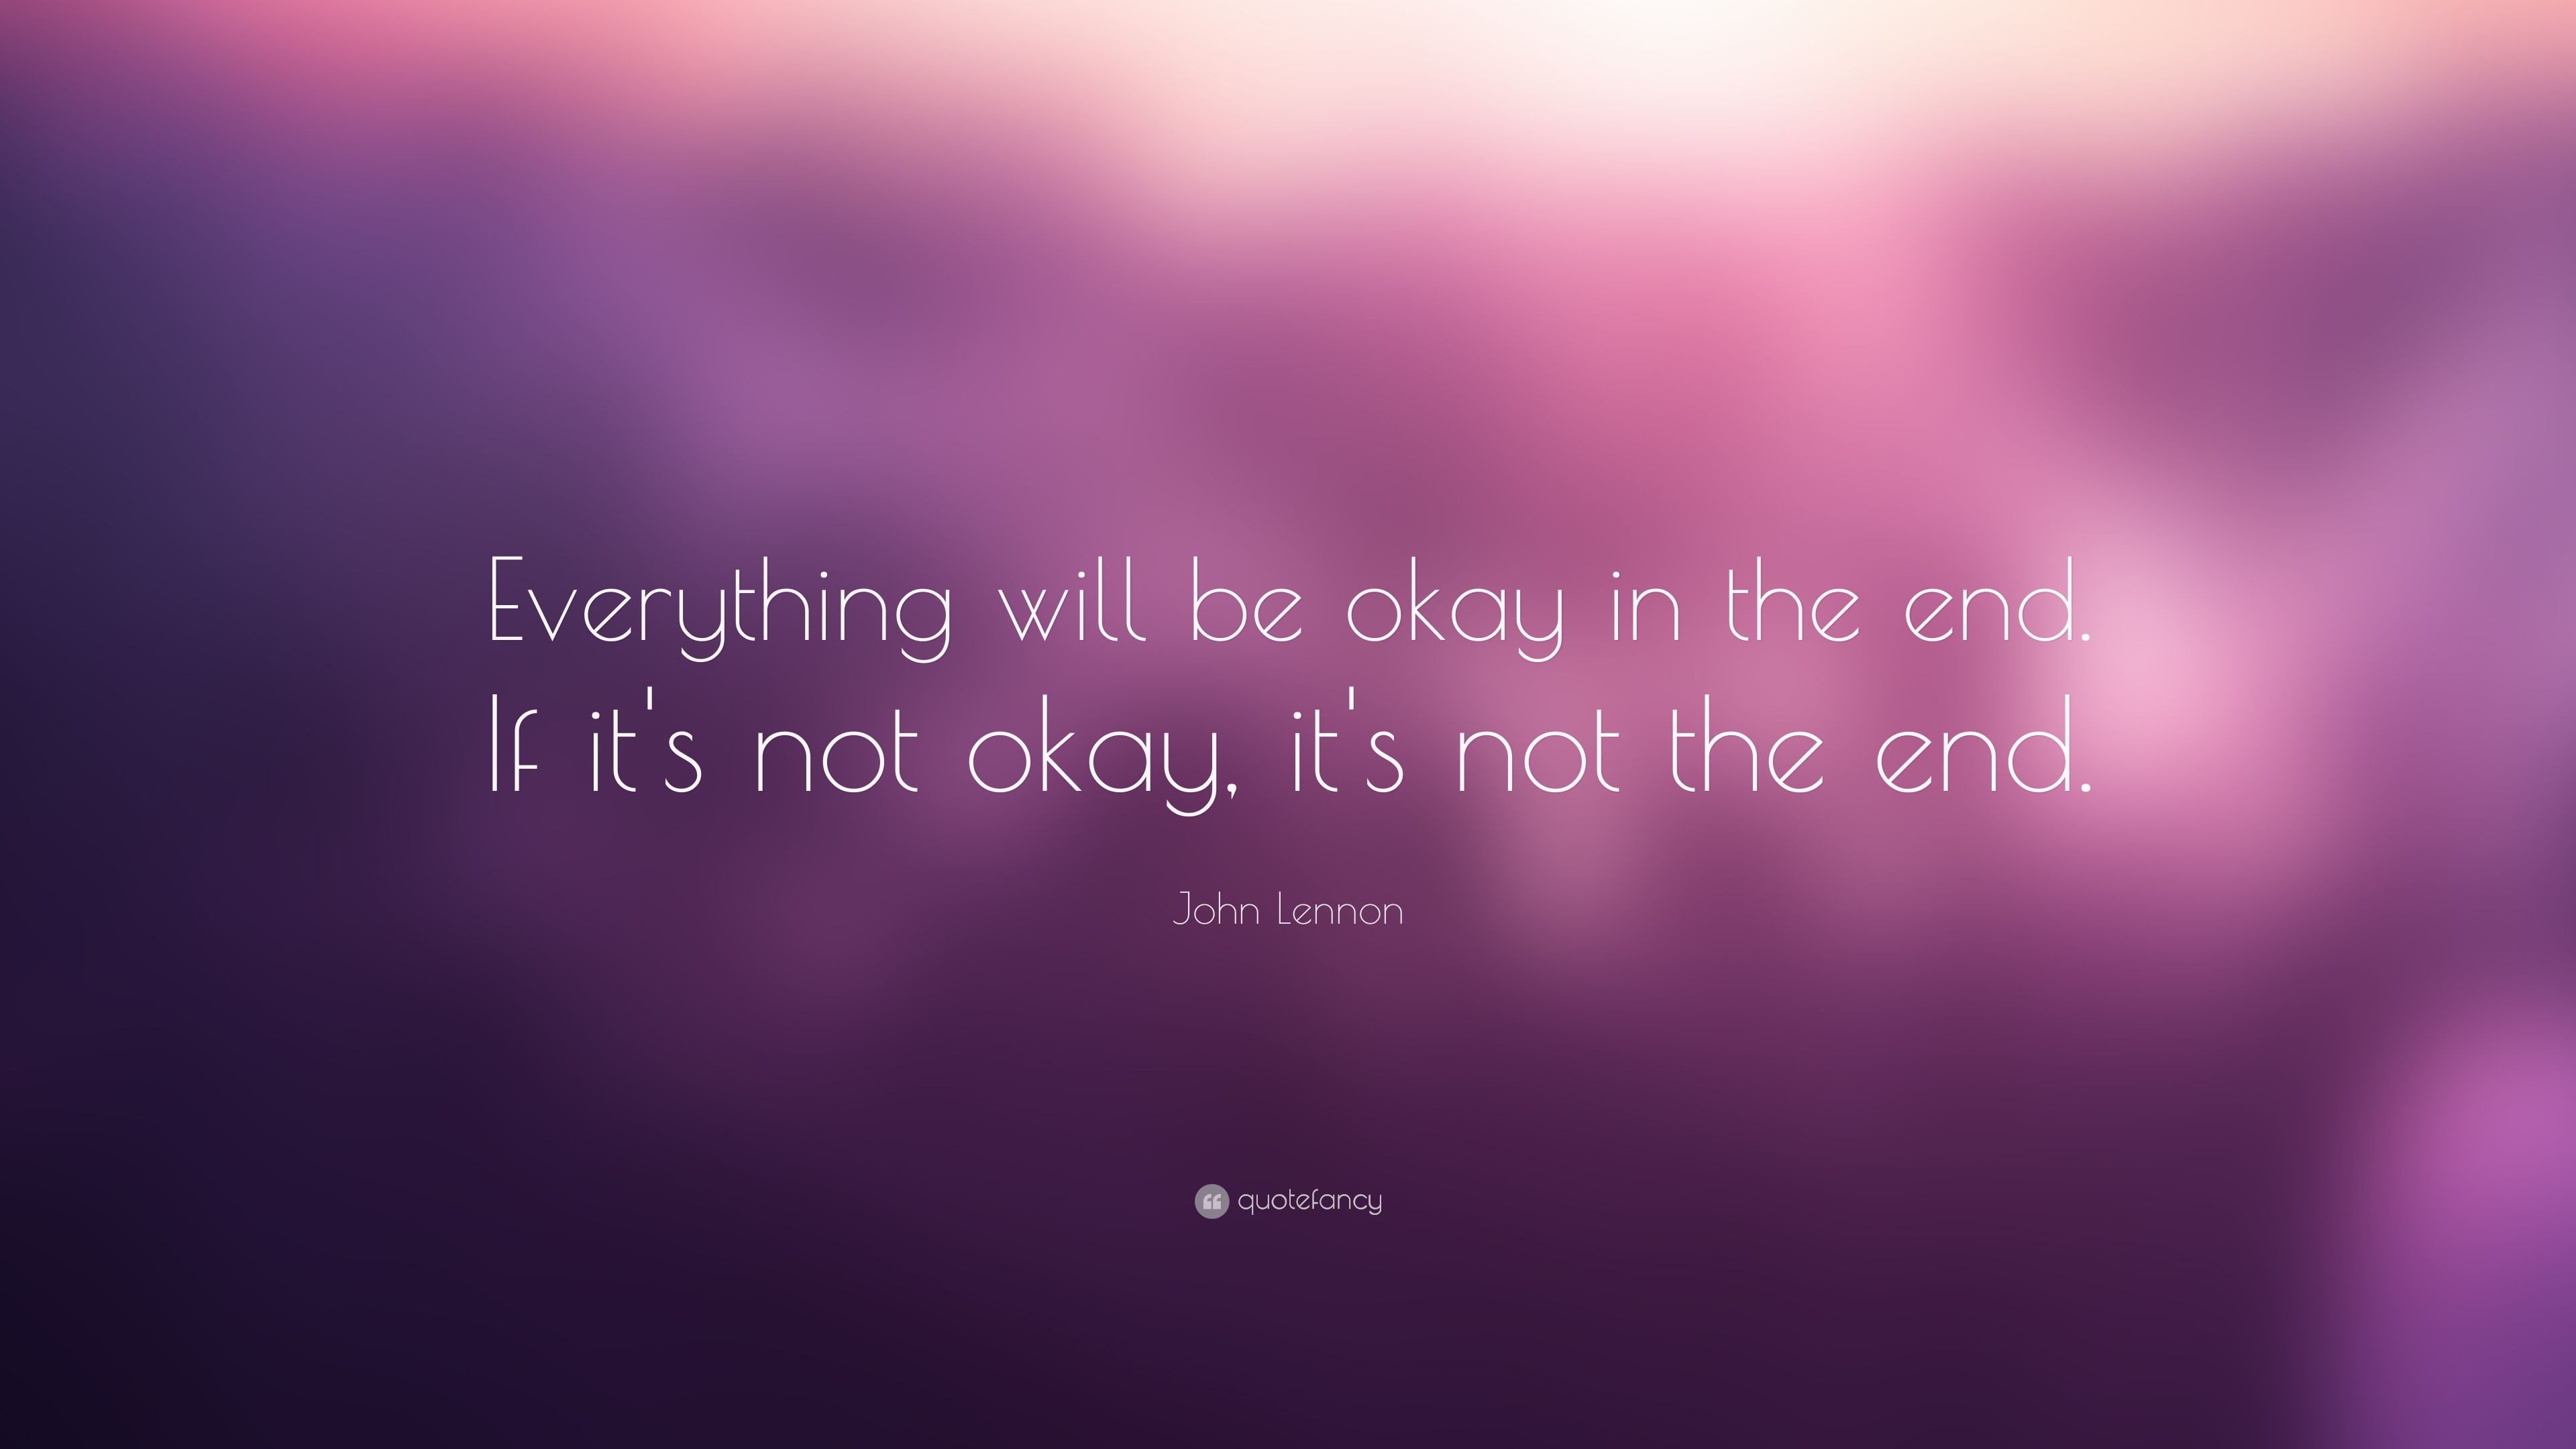 John Lennon Quote: “Everything will be okay in the end. If it's